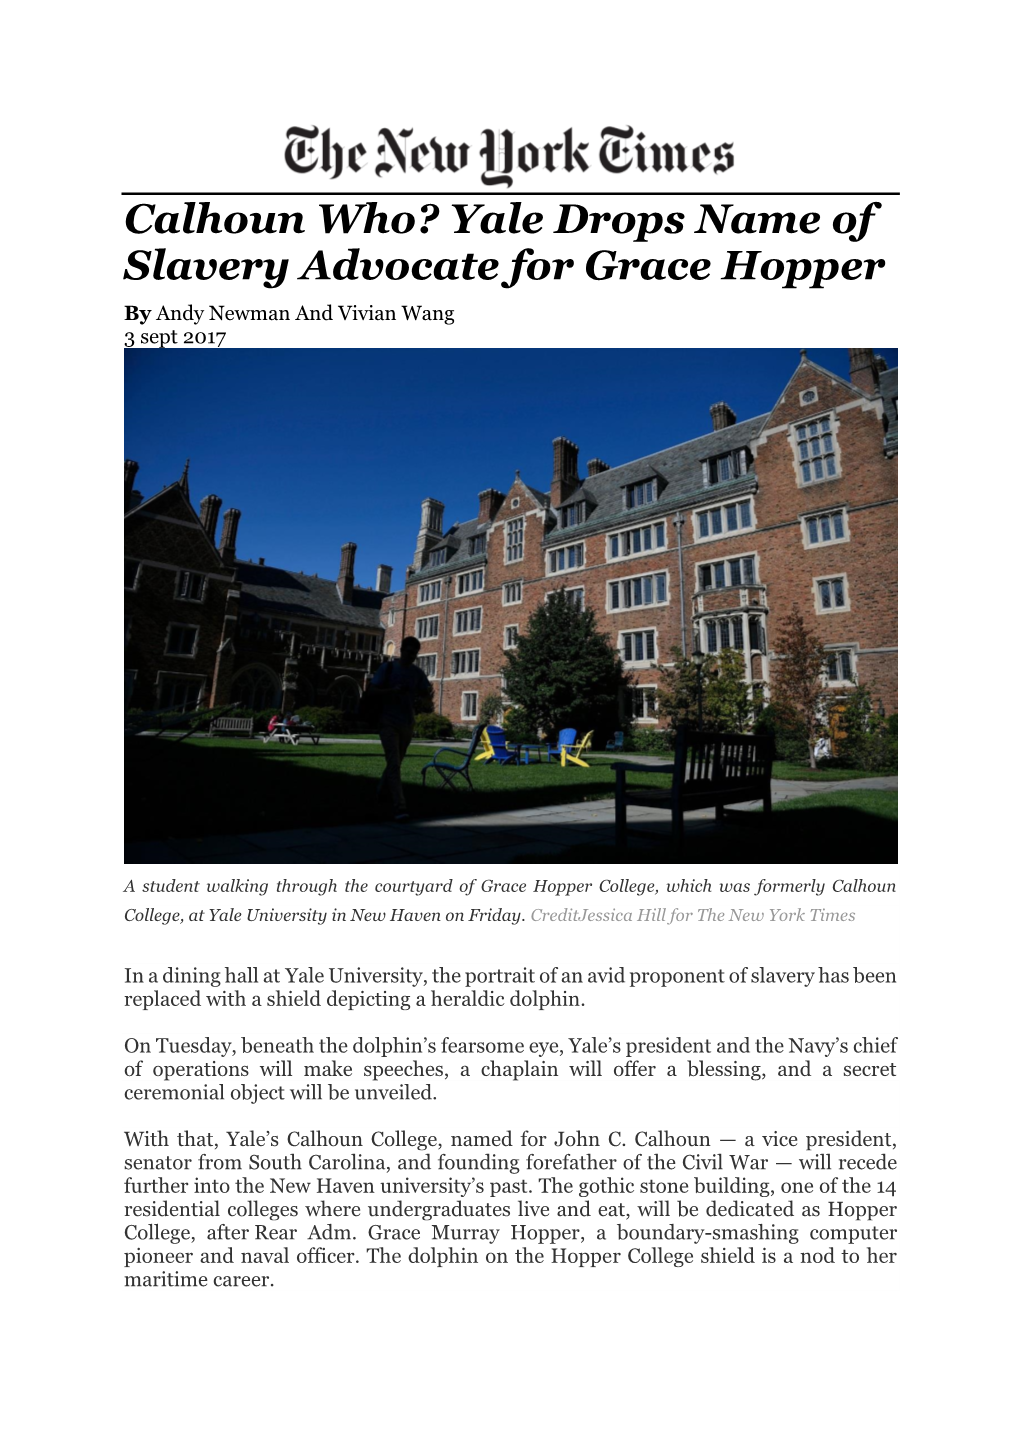 Yale Drops Name of Slavery Advocate for Grace Hopper by Andy Newman and Vivian Wang 3 Sept 2017